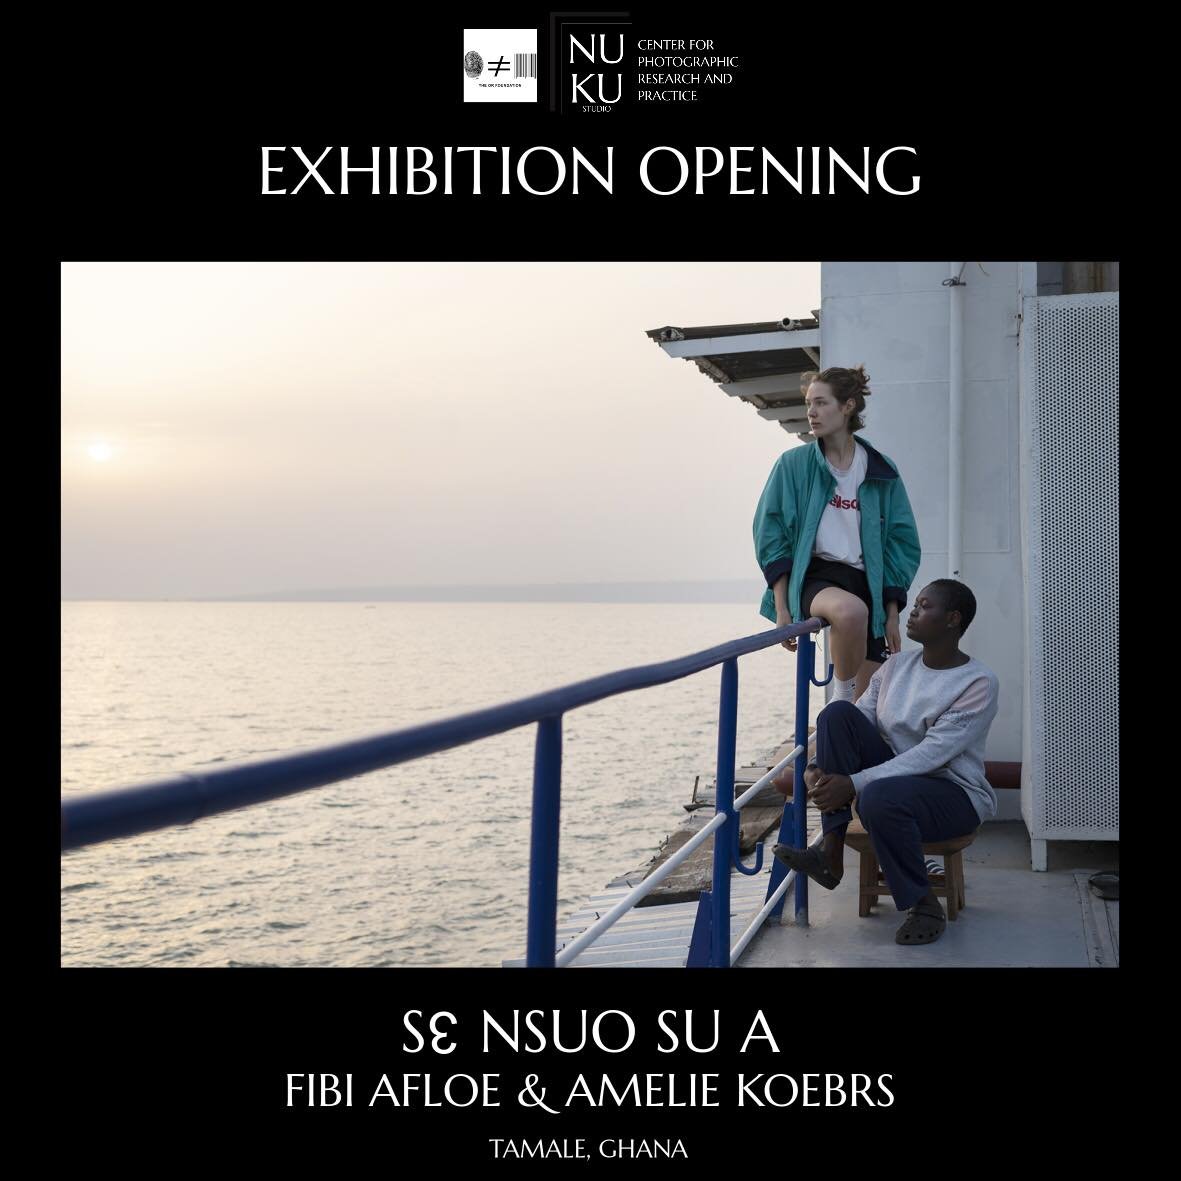 1 more week until Nuku Studio presents &ldquo;Sɛ nsuo su a - When water cries&rdquo;, a photo exhibition by Fibi Afloe ( @storiesfromnima) and Amelie Koerbs (@ameliekoerbs.photography ). The outdoor exhibition in Nuku Studio`s garden in Tamale will e